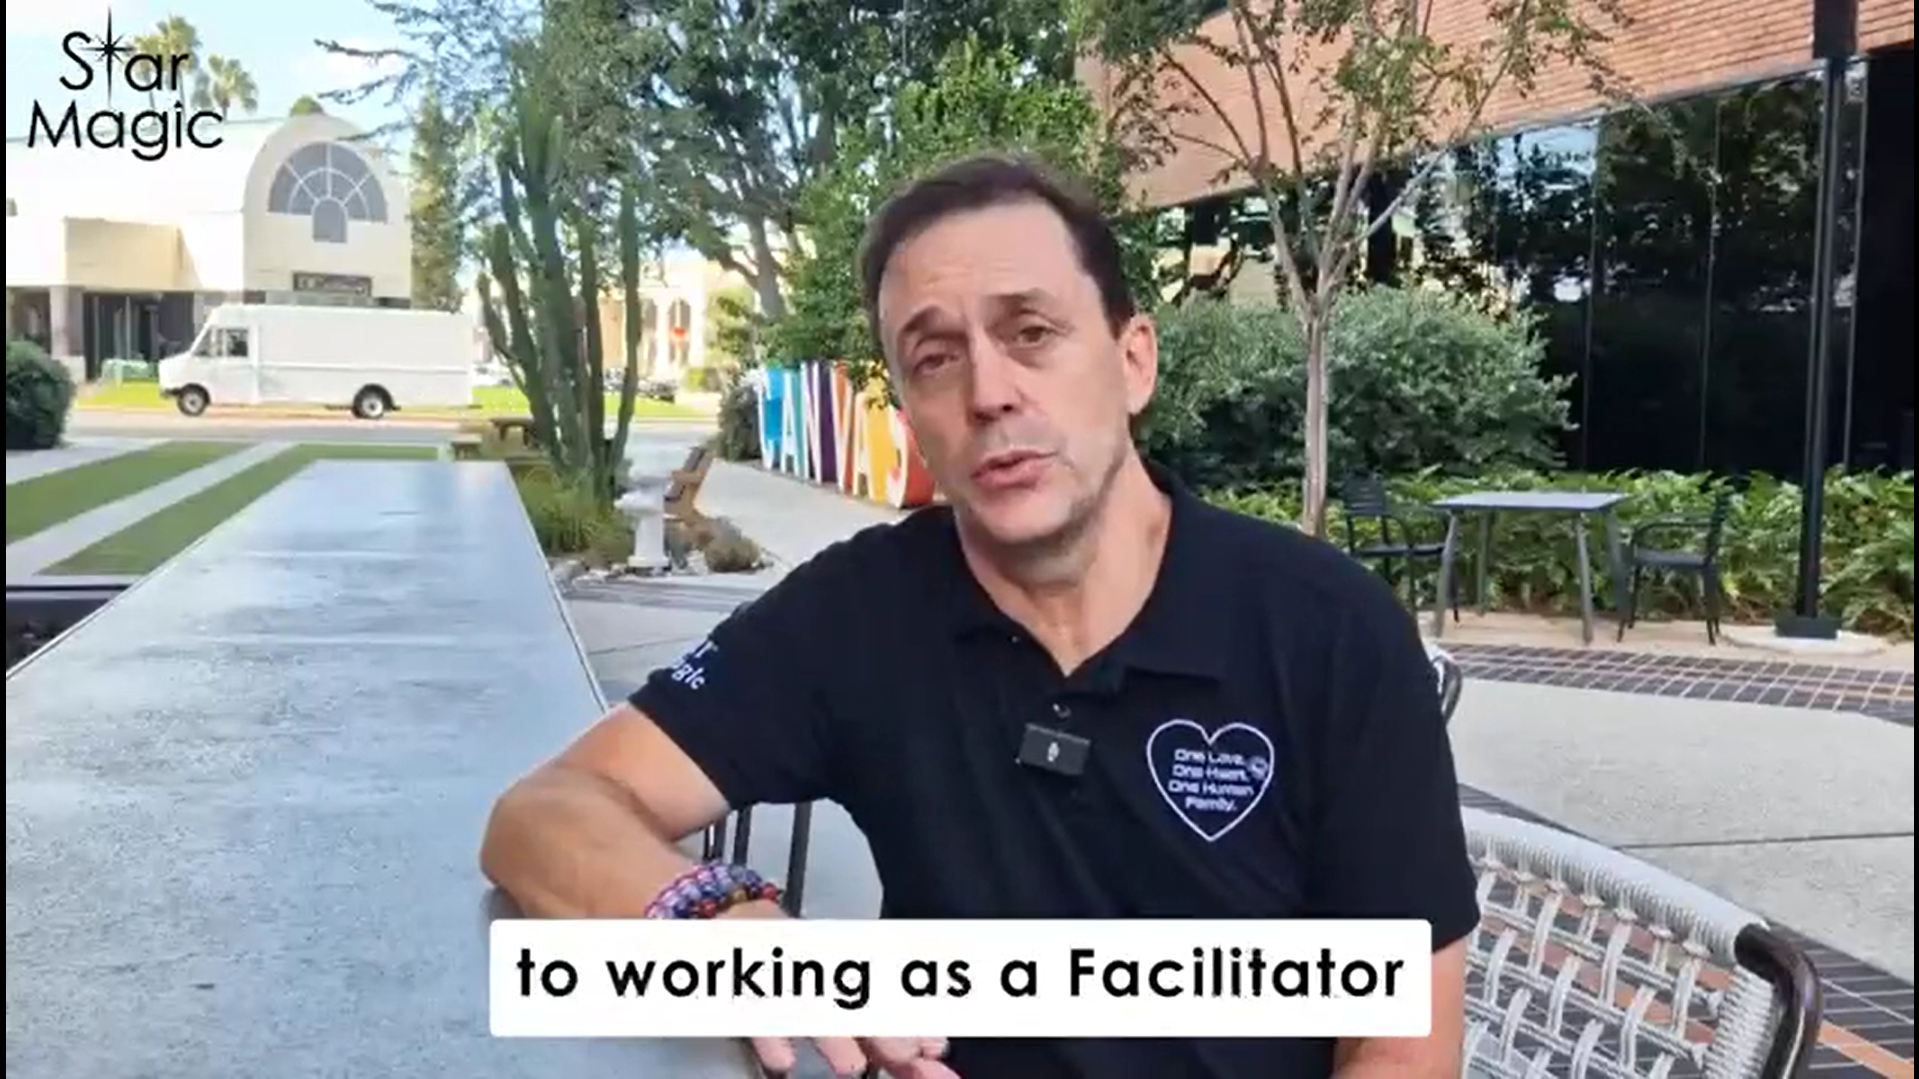 What Do Others Say About Facilitator Training?